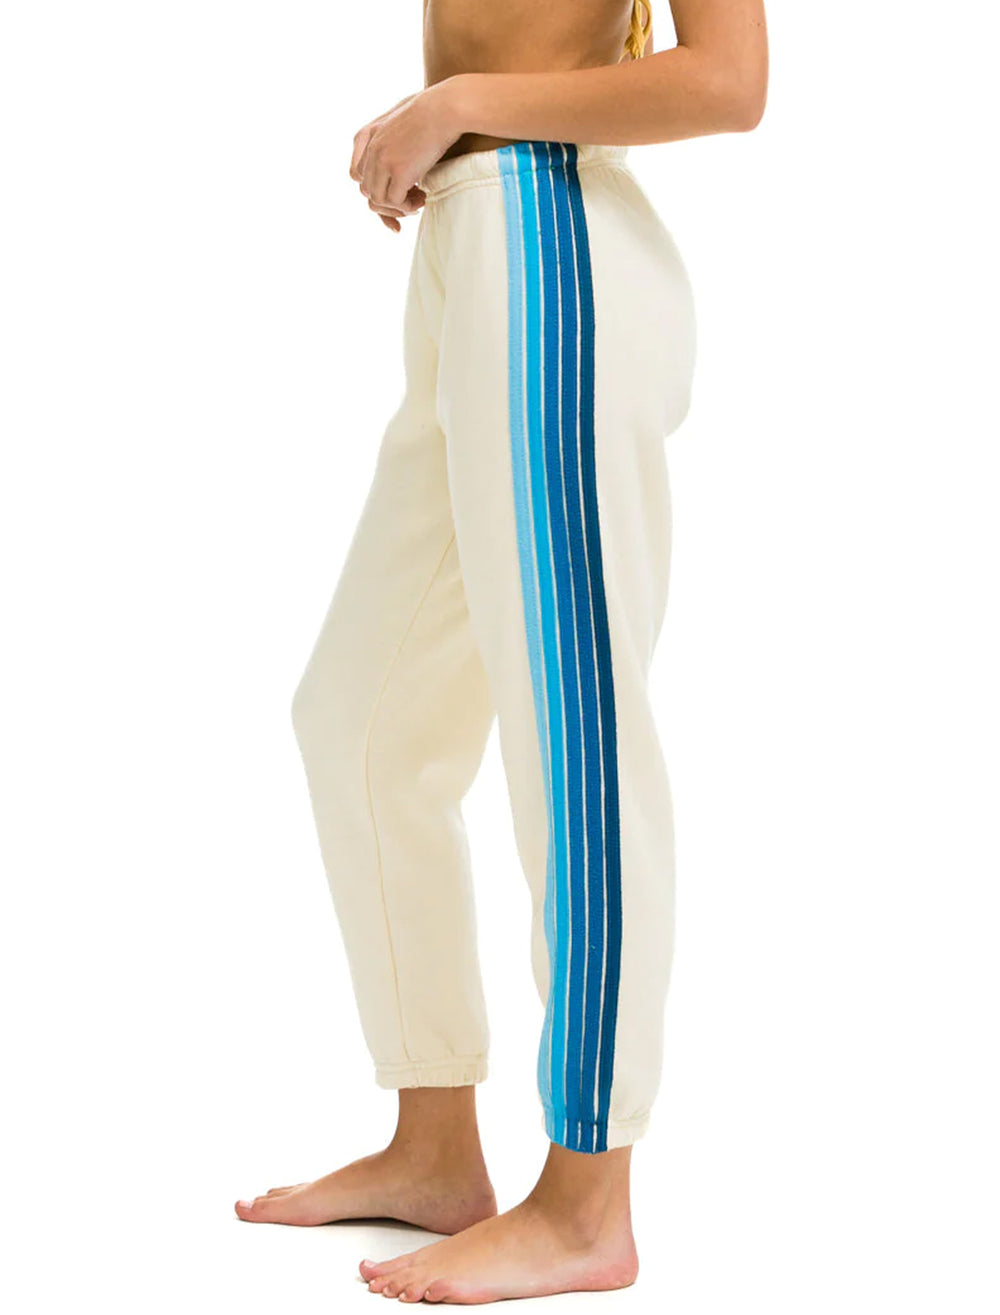 Model wearing Aviator Nation's 5 stripe womens sweatpants in vintage white and blue.